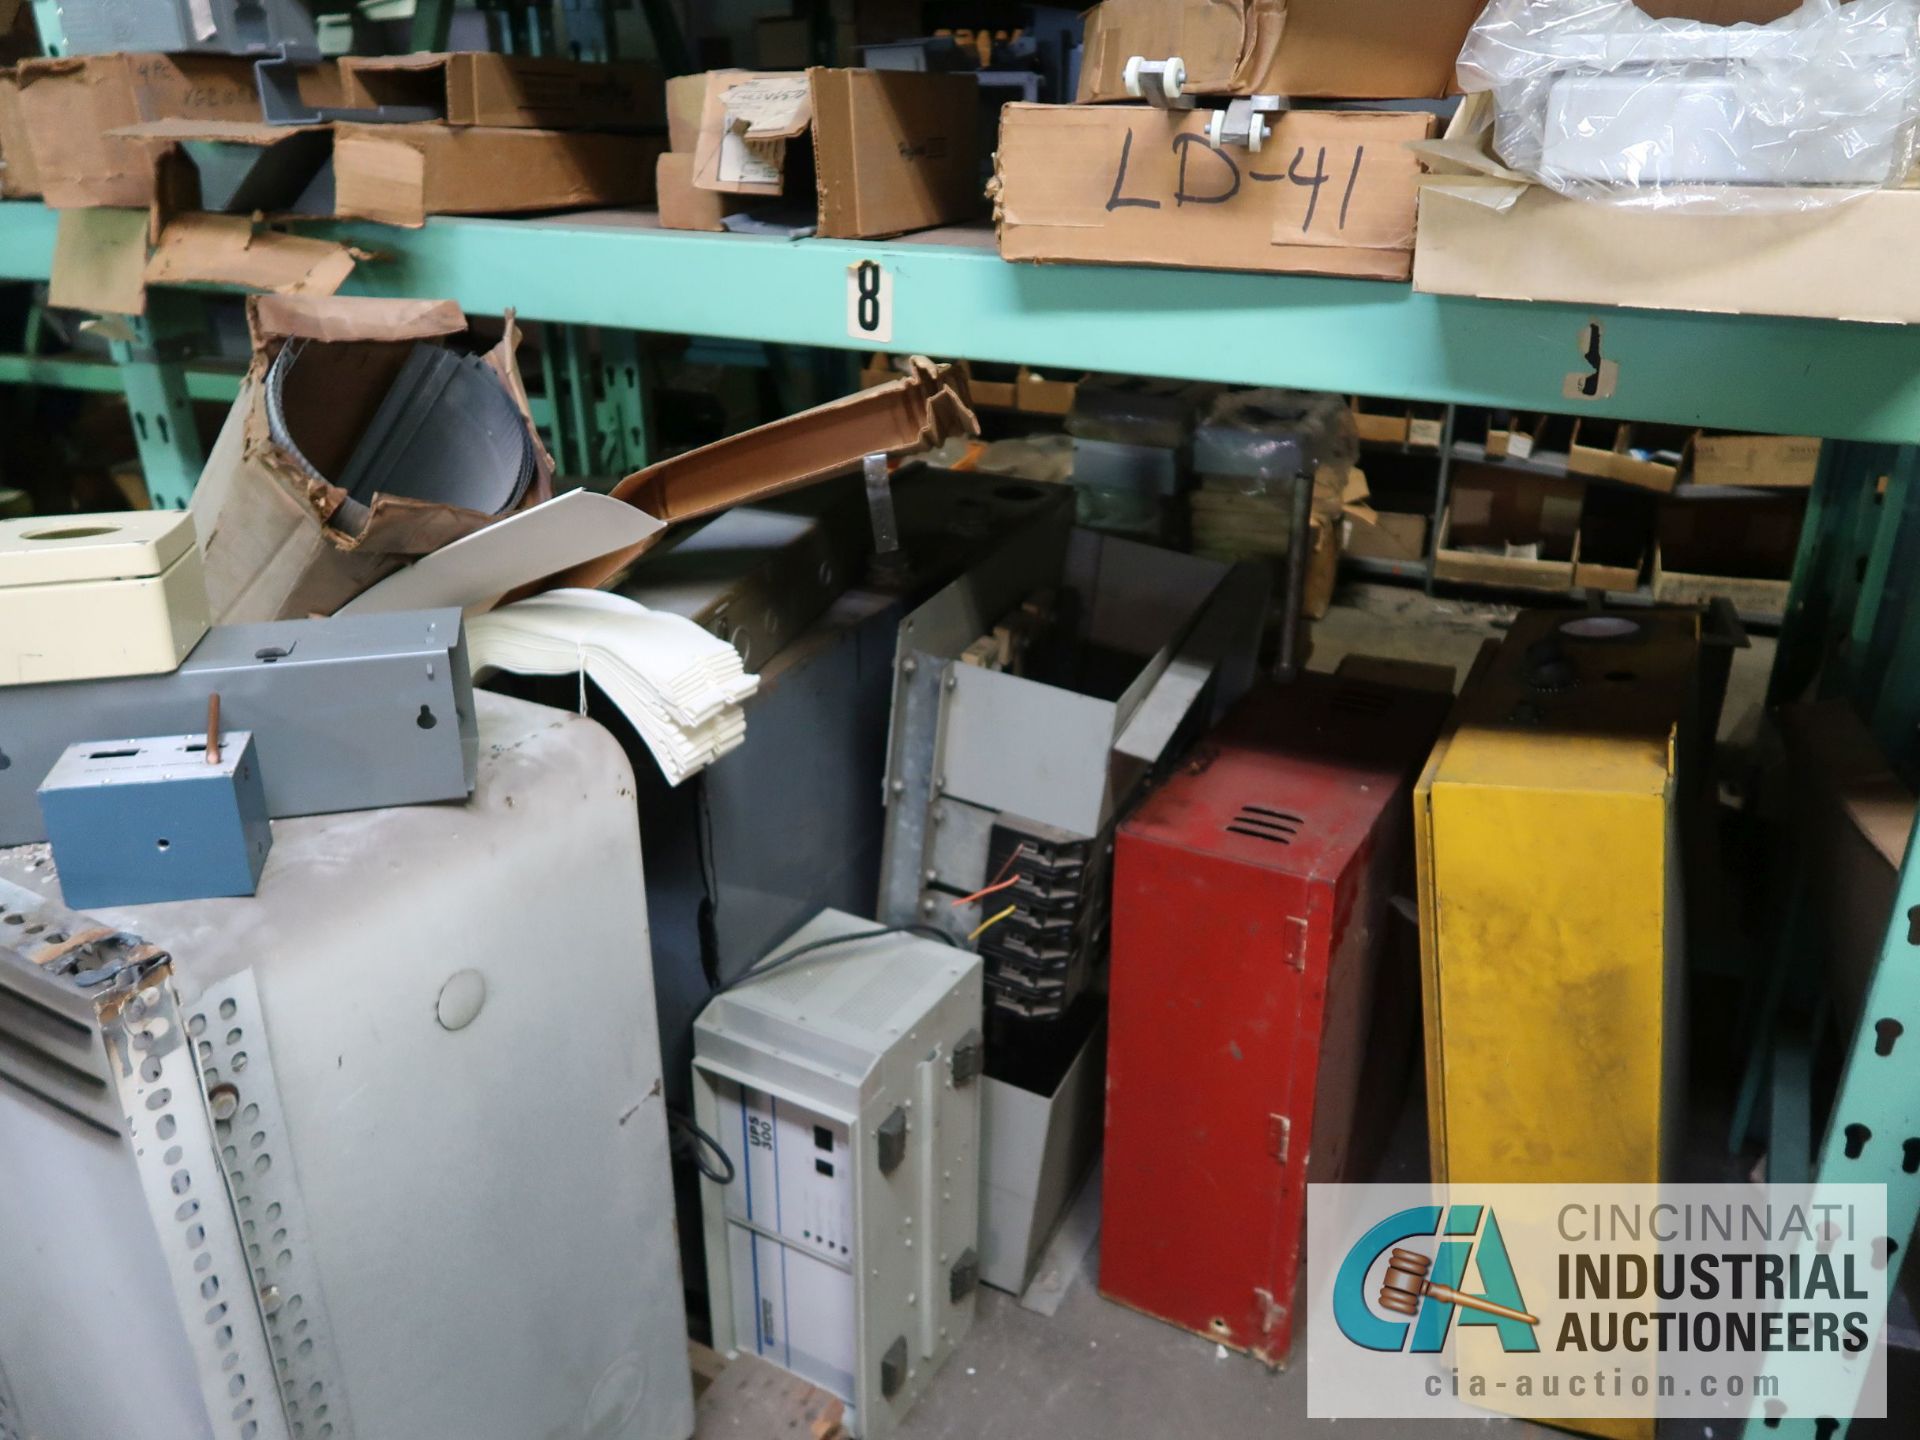 CONTENTS OF (5) RACKS INCLUDING MISCELLANEOUS ELECTRIC BOXES, PANELS, CONDUIT PANELS **NO RACKS** - Image 9 of 15